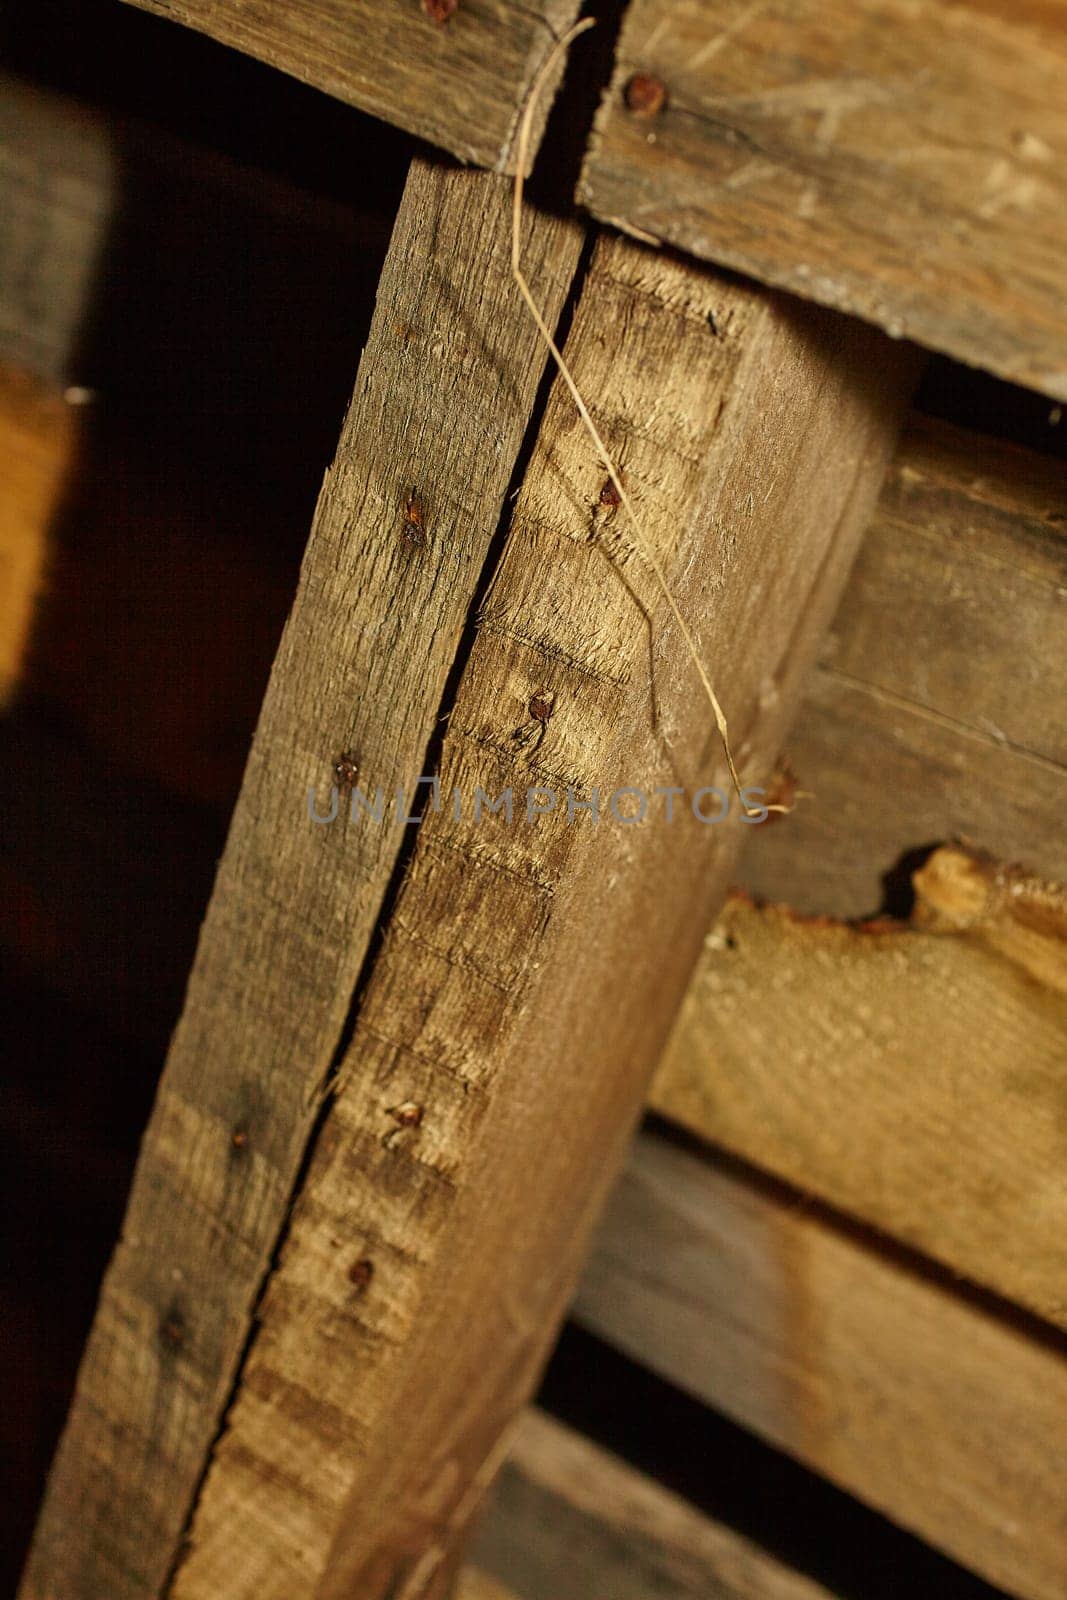 Authentic vintage wooden beams with a rustic texture and rich golden-brown color, showcasing history and durability. Captivating angles and rough grain patterns add depth and character. Ideal for interior design and historical renovation.